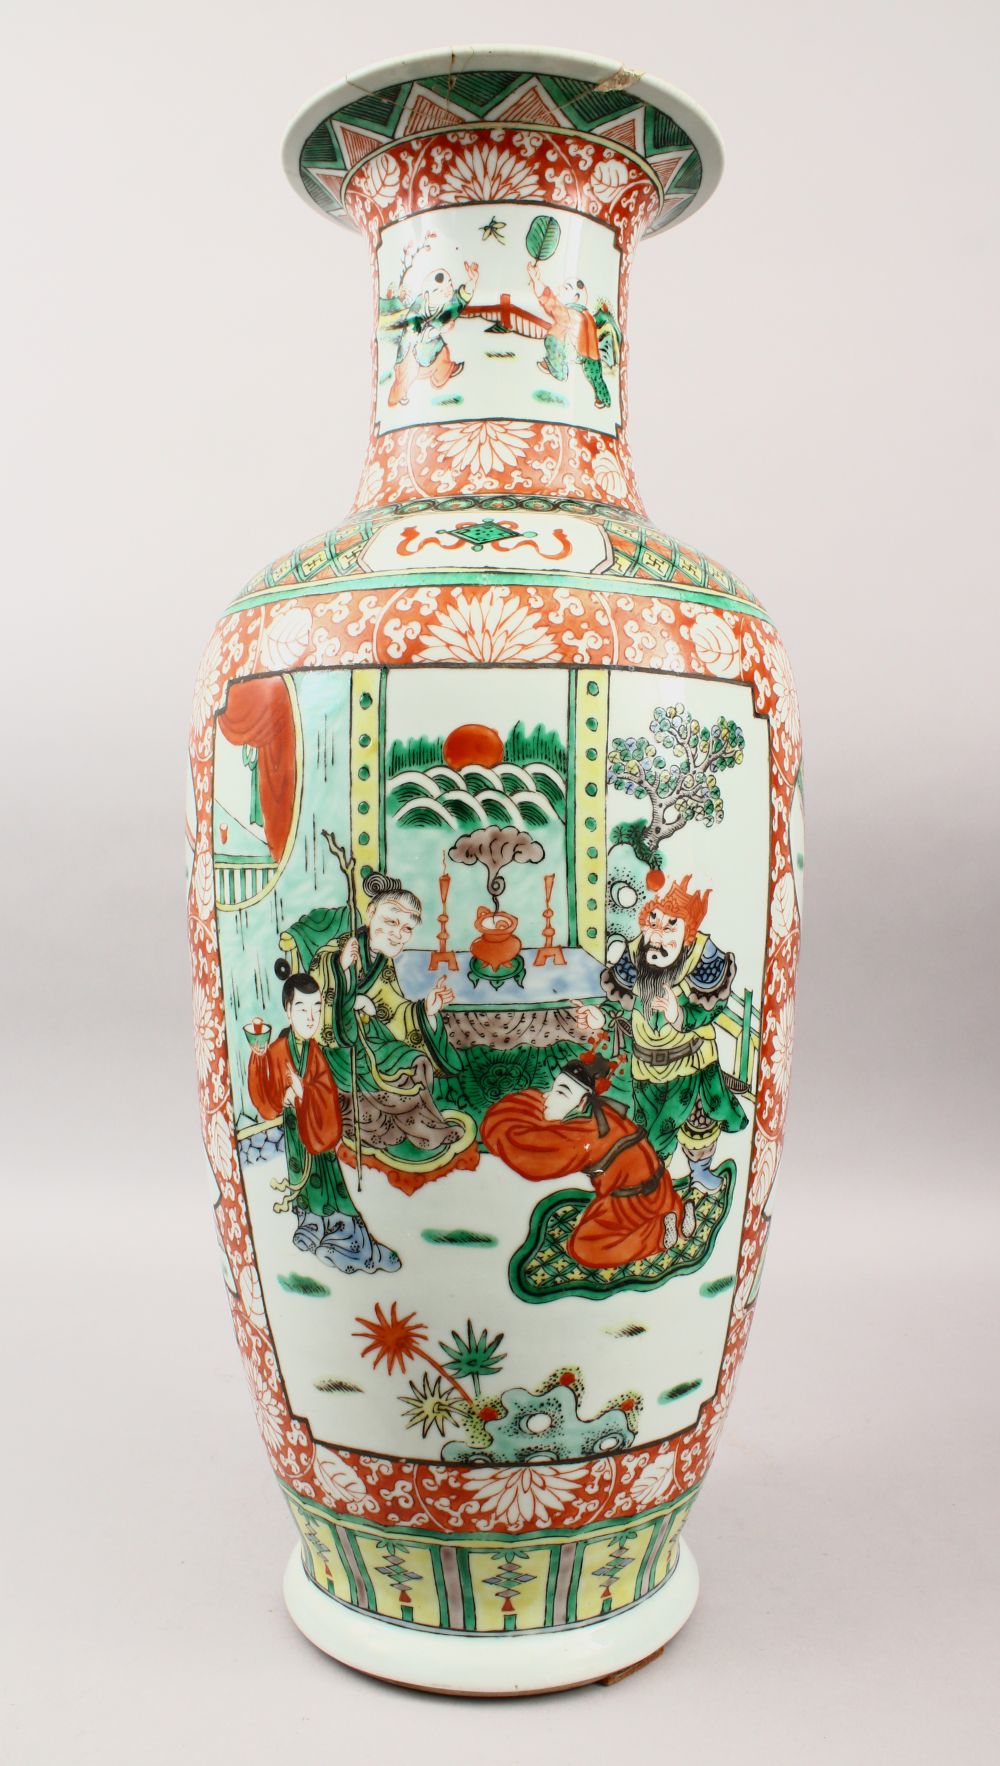 A GOOD 19TH CENTURY CHINESE FAMILLE VERTE PORCELAIN VASE, decorated with scenes of figures